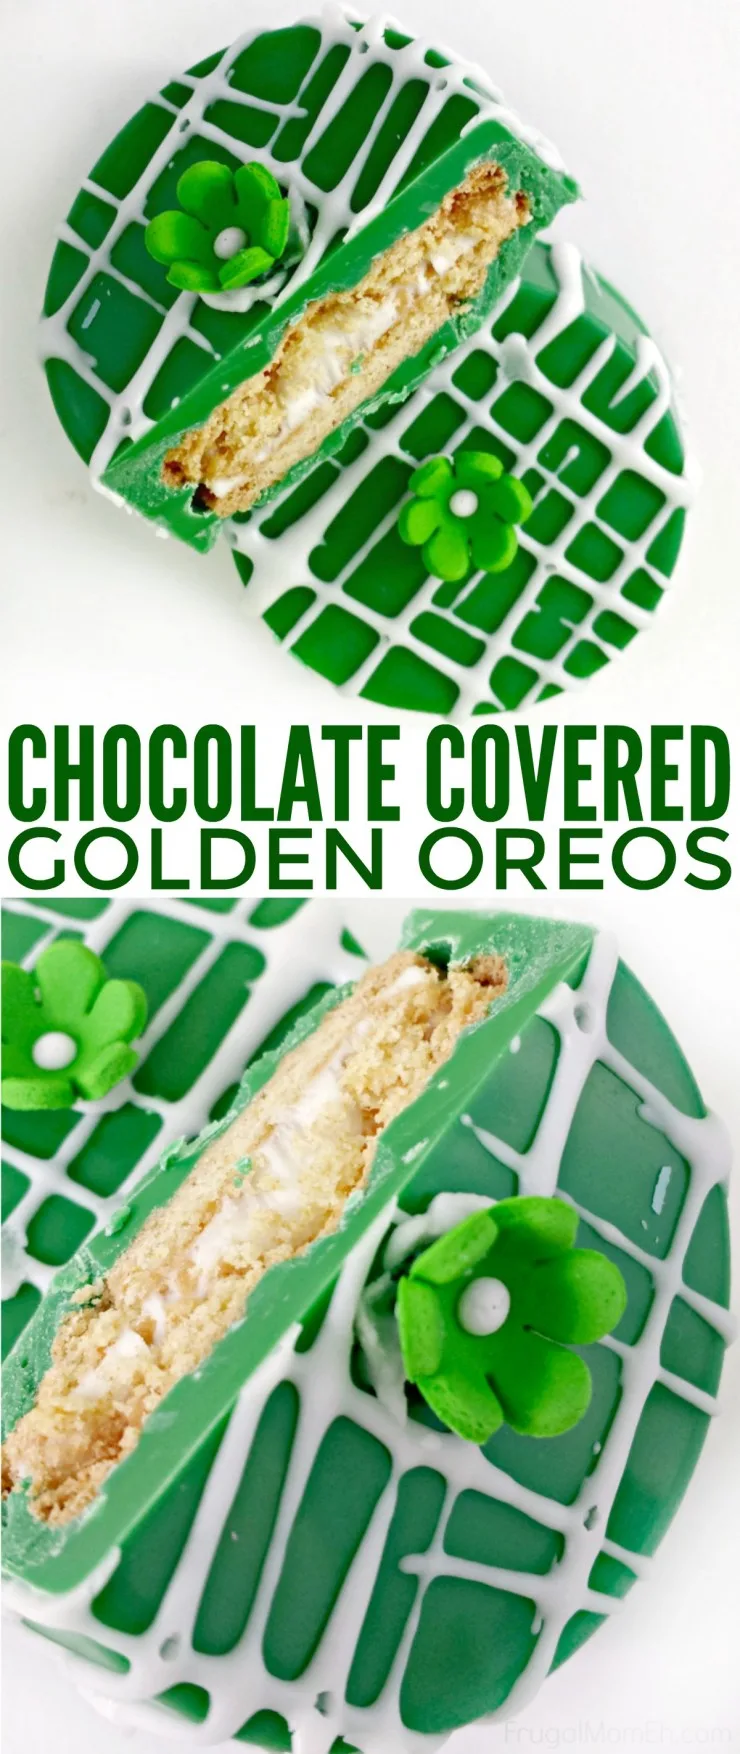 Sometimes it's super nice to have festive treats on hand, such as these Chocolate Covered Golden Oreos for St. Patrick's Day, that look impressive to guests but are really just fuss free and easy to throw together. 